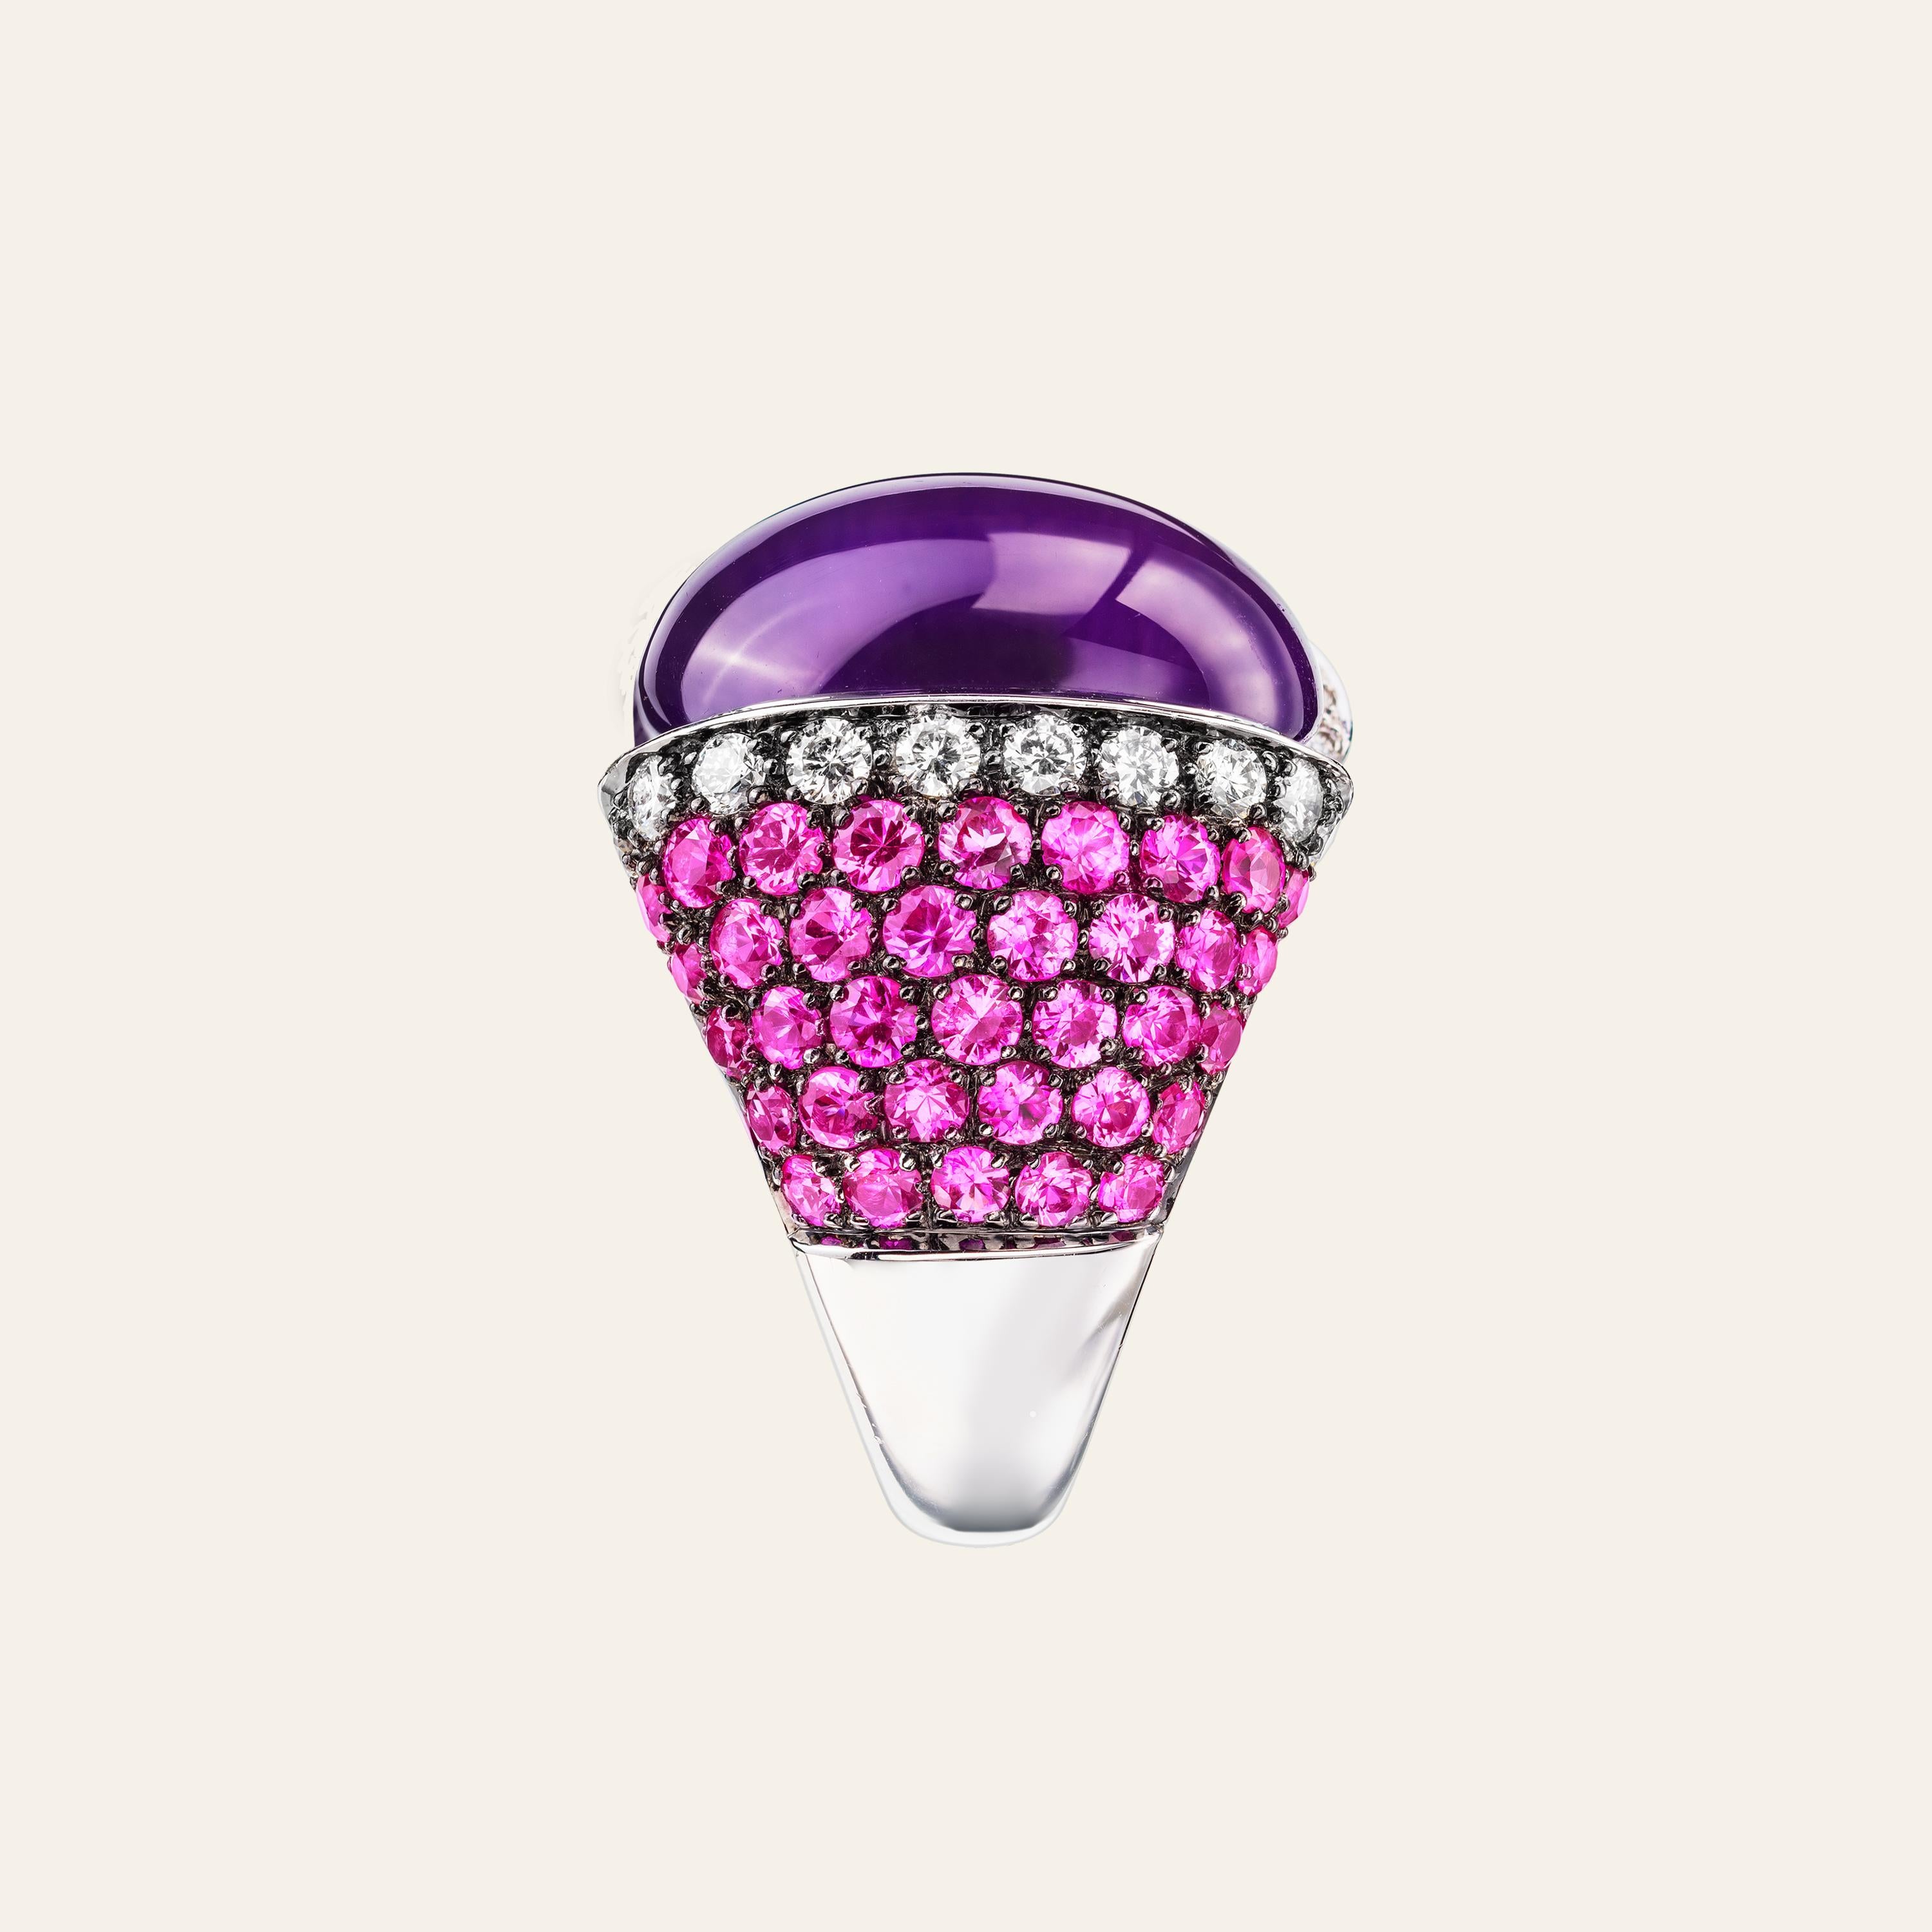 Sabbadini Pink And Purple Amethyst Cocktail Ring 
Black rhodium treated 18k white gold ring, oval cut cabochon amethyst, round cut diamonds 0,82 carats and round cut pink sapphires 3,38 carats. 
Gold 12,43grams
Hand made jewelry & designed in Milan,